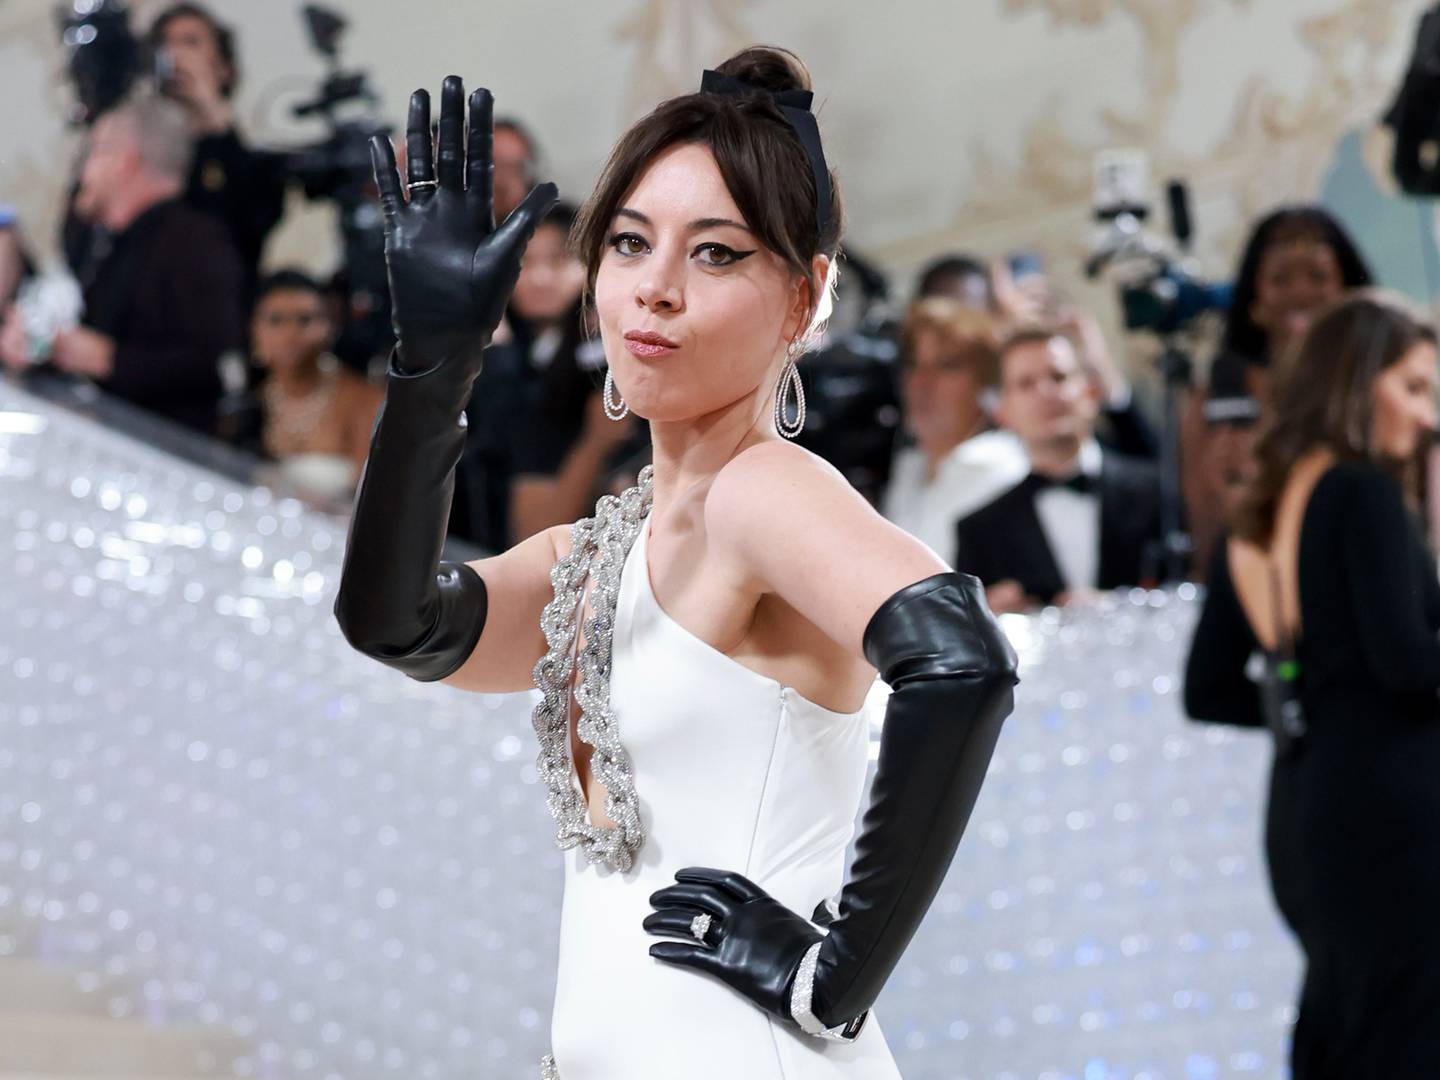 Actress Aubrey Plaza waves at the crowd at the entrance to the 2023 Met Gala  while wearing black gloves and a white gown.